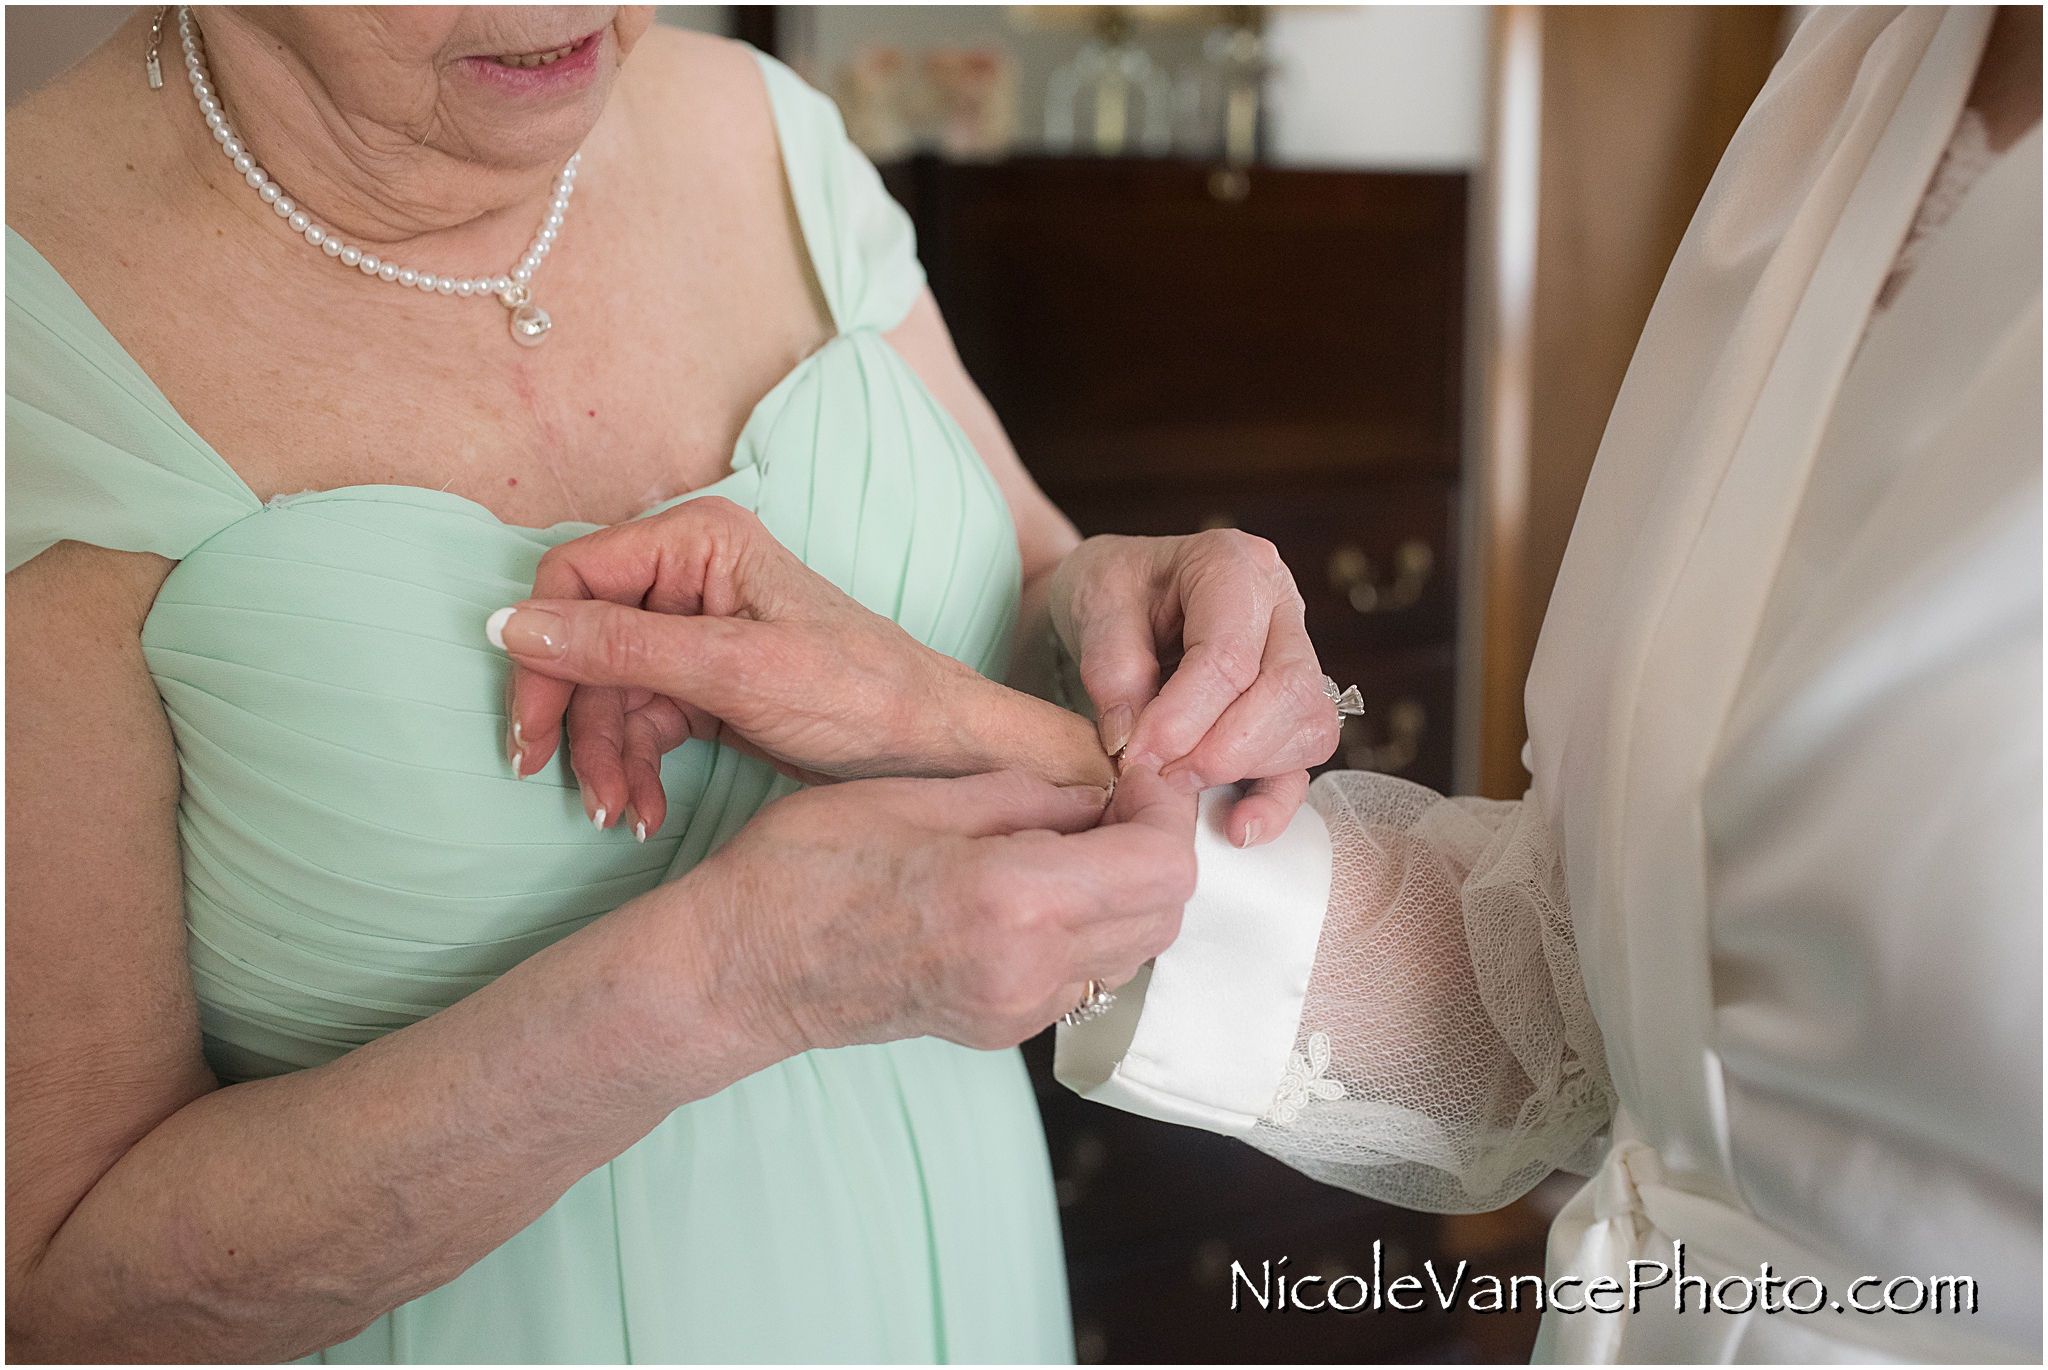 The bride's sister helps her put on her bracelet as she prepares for her wedding day.